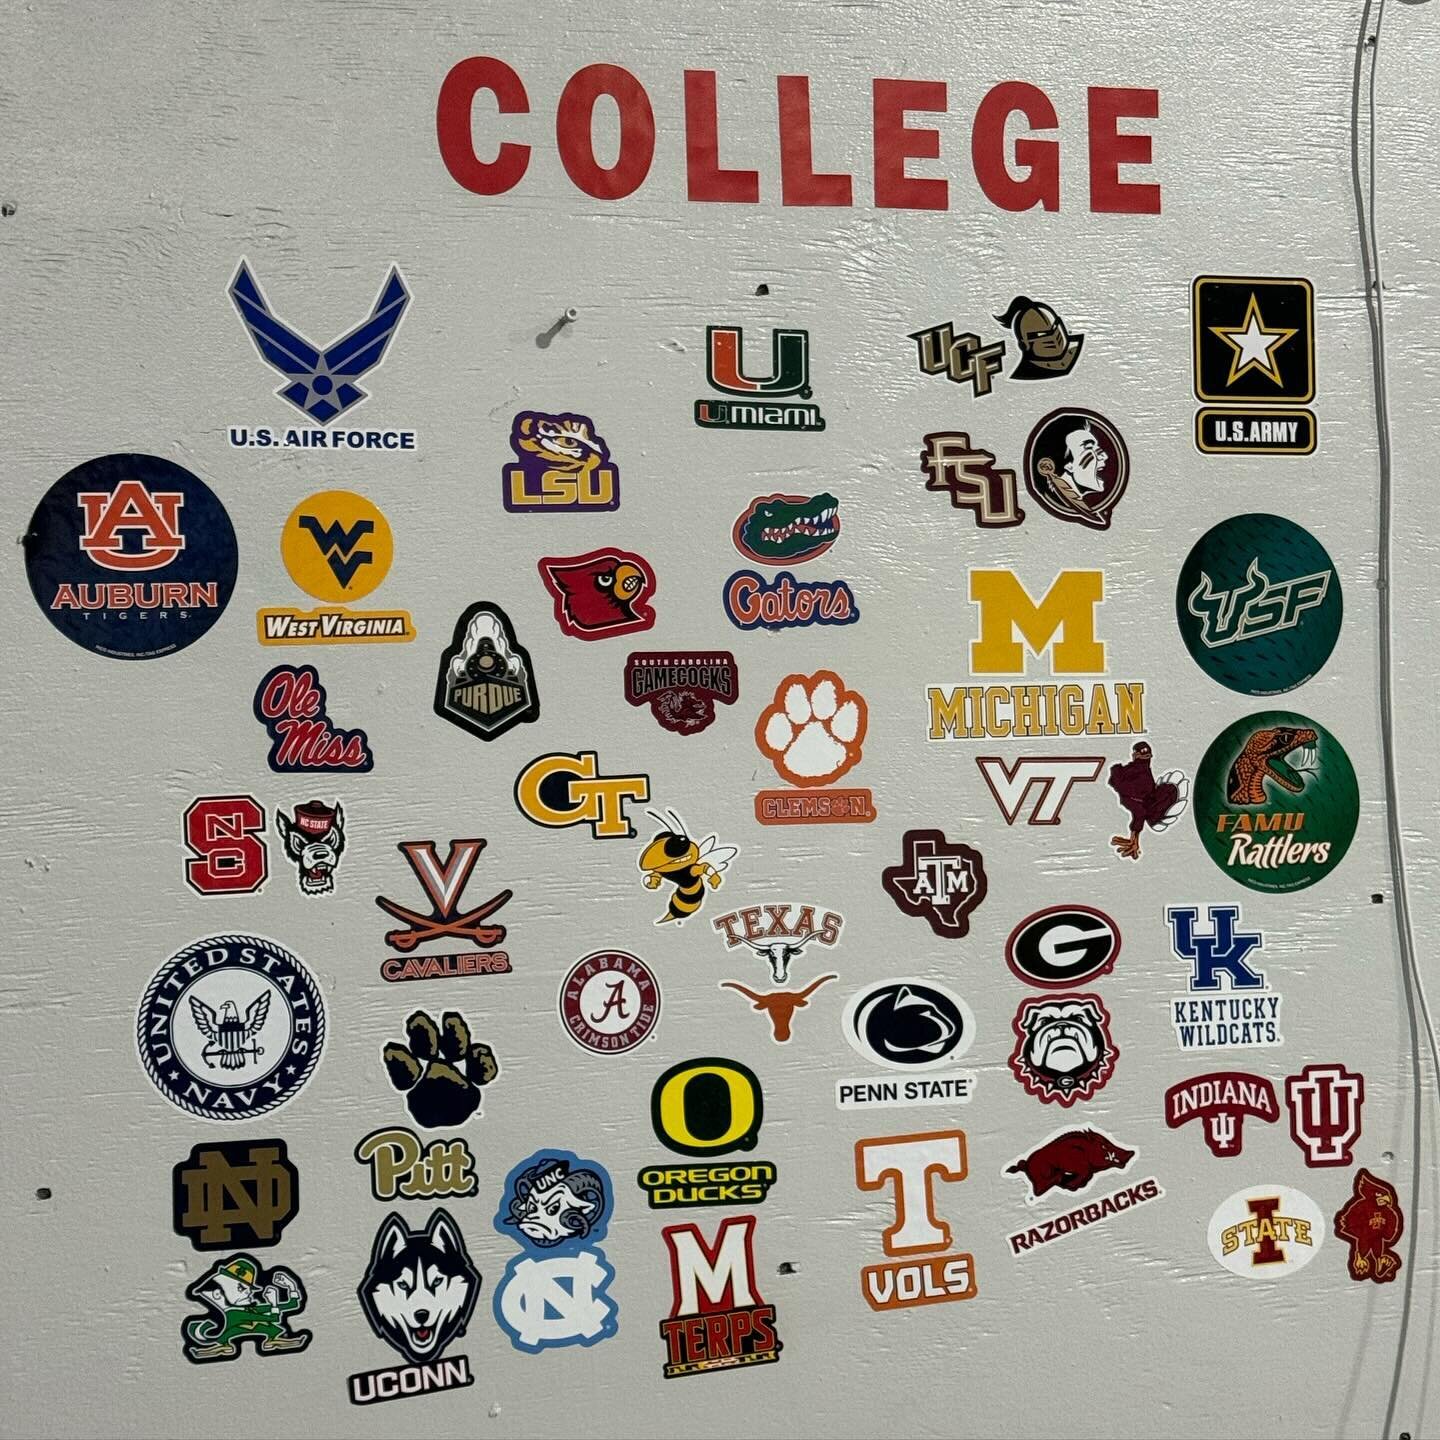 A small Holiday project at our @tnxlbaseballacademy location. Tracking all Competitor athletes who played in College and Pro. What schools or Pro teams are we missing?

I will start - College - Stetson and UCLA. Pro - NFL - Eagles, Giants and Saints.